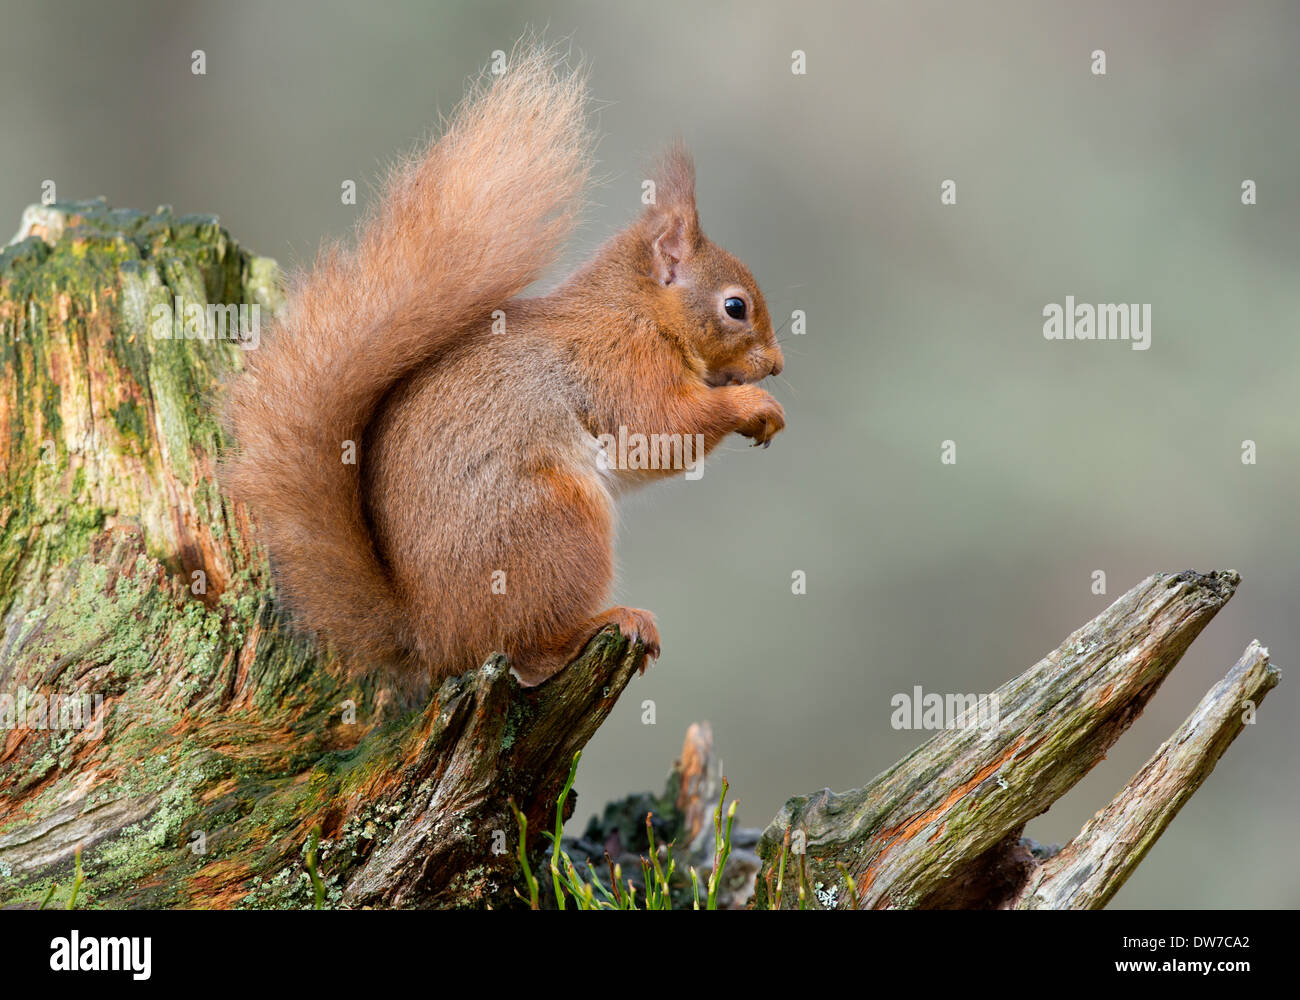 red squirrel sat on a old tree stump looking right Stock Photo